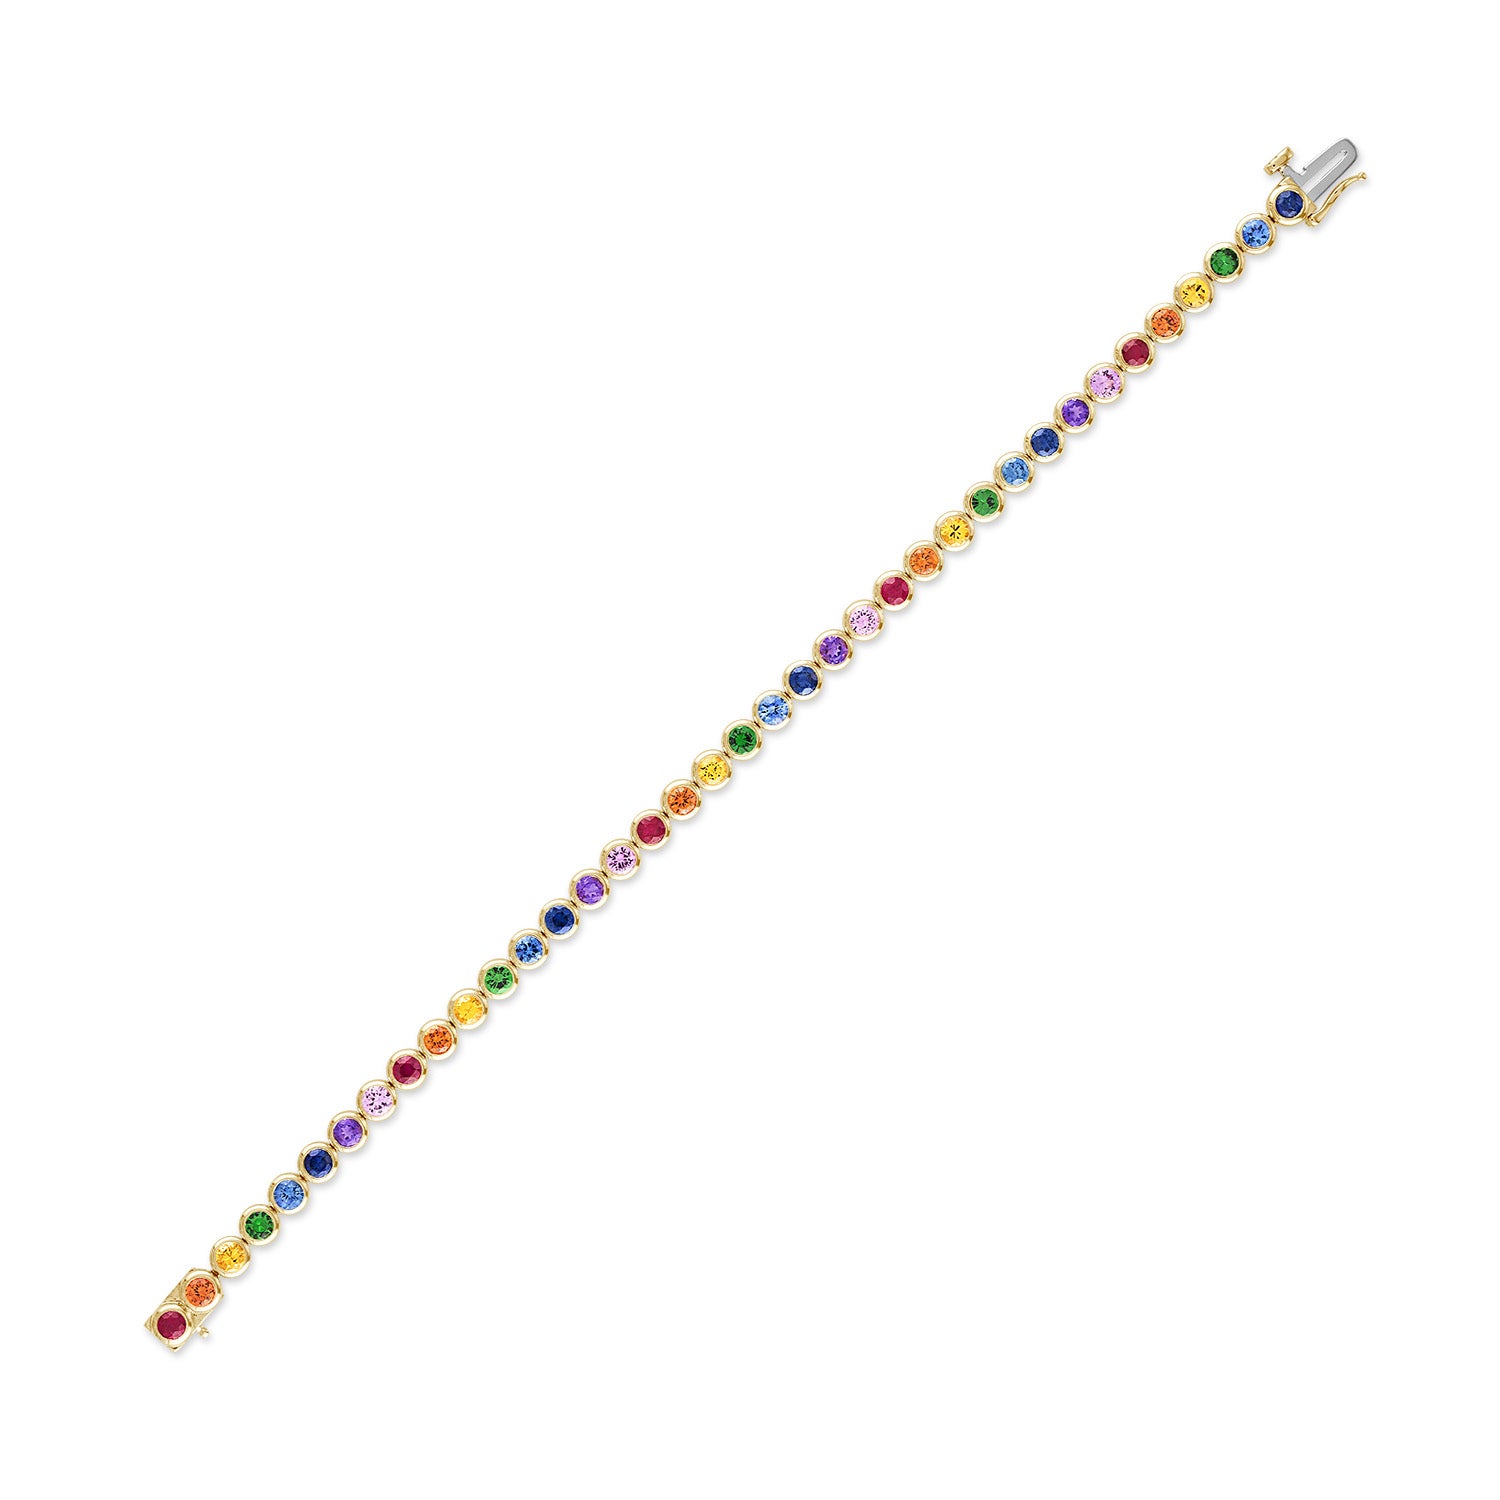 14k yellow gold rainbow bezel set tennis bracelet in 4.95 carats and unclasped